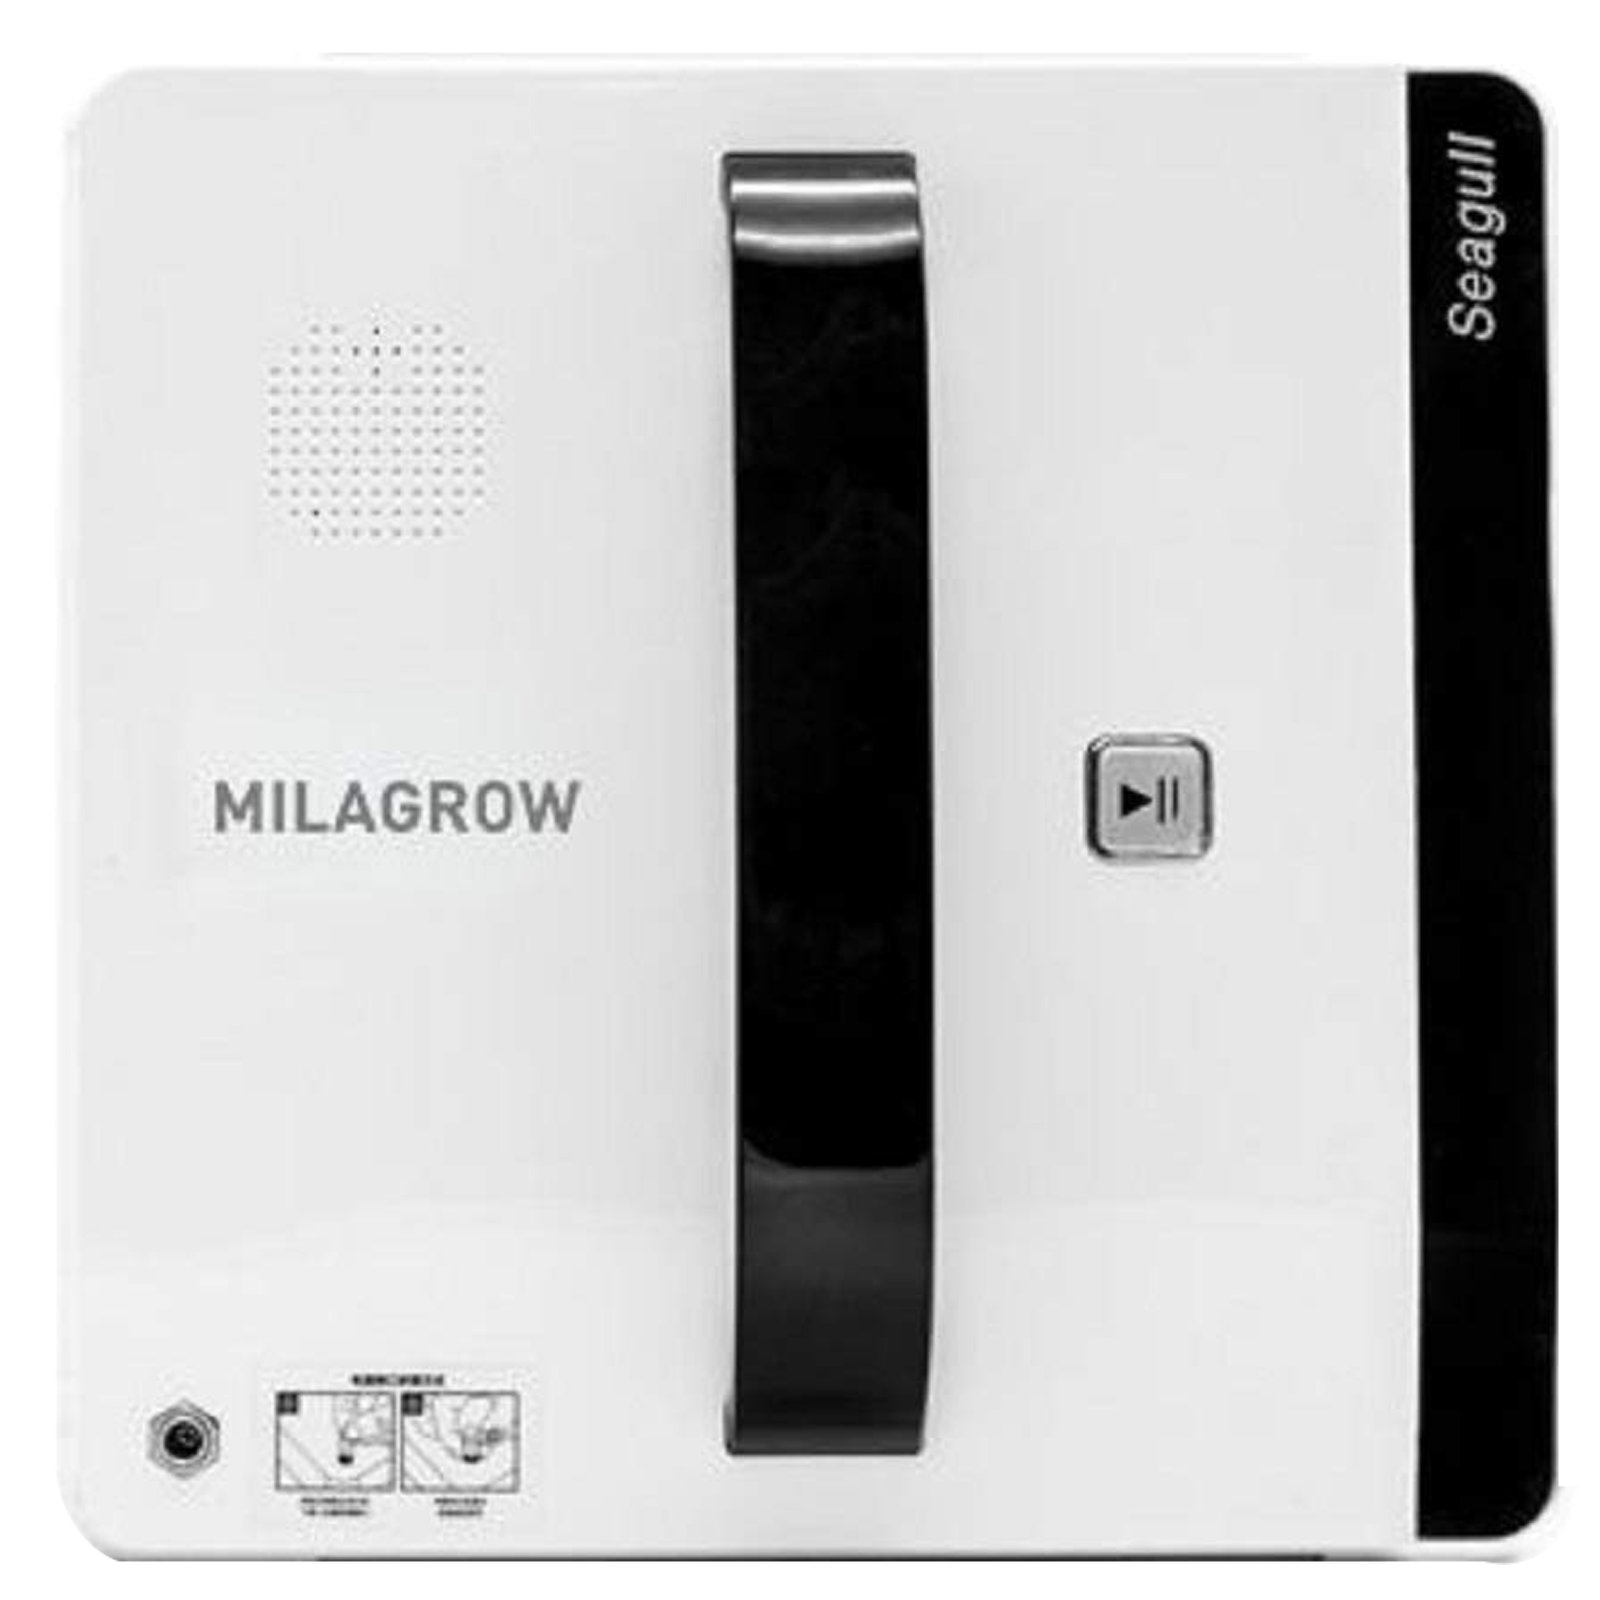 Milagrow Window Seagull 45 Watts Robotic Glass Cleaner (White)_1